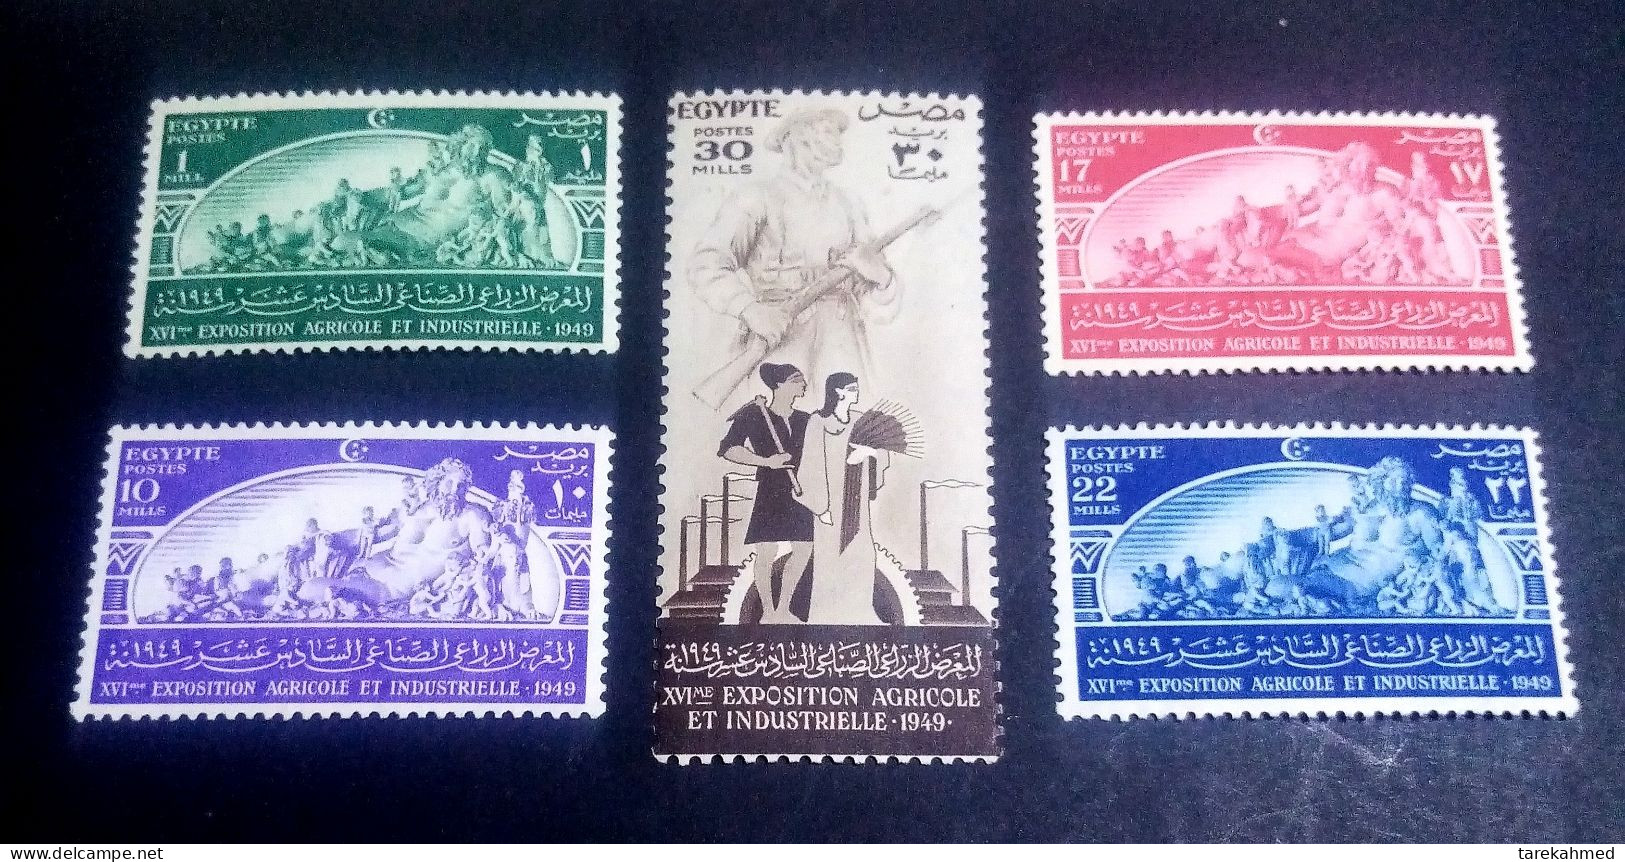 EGYPT KINGDOM 1949 , AGRICULTURE & INDUSTRY EXPOSITION S.G. 352-356 . Super MNH - Ungebraucht